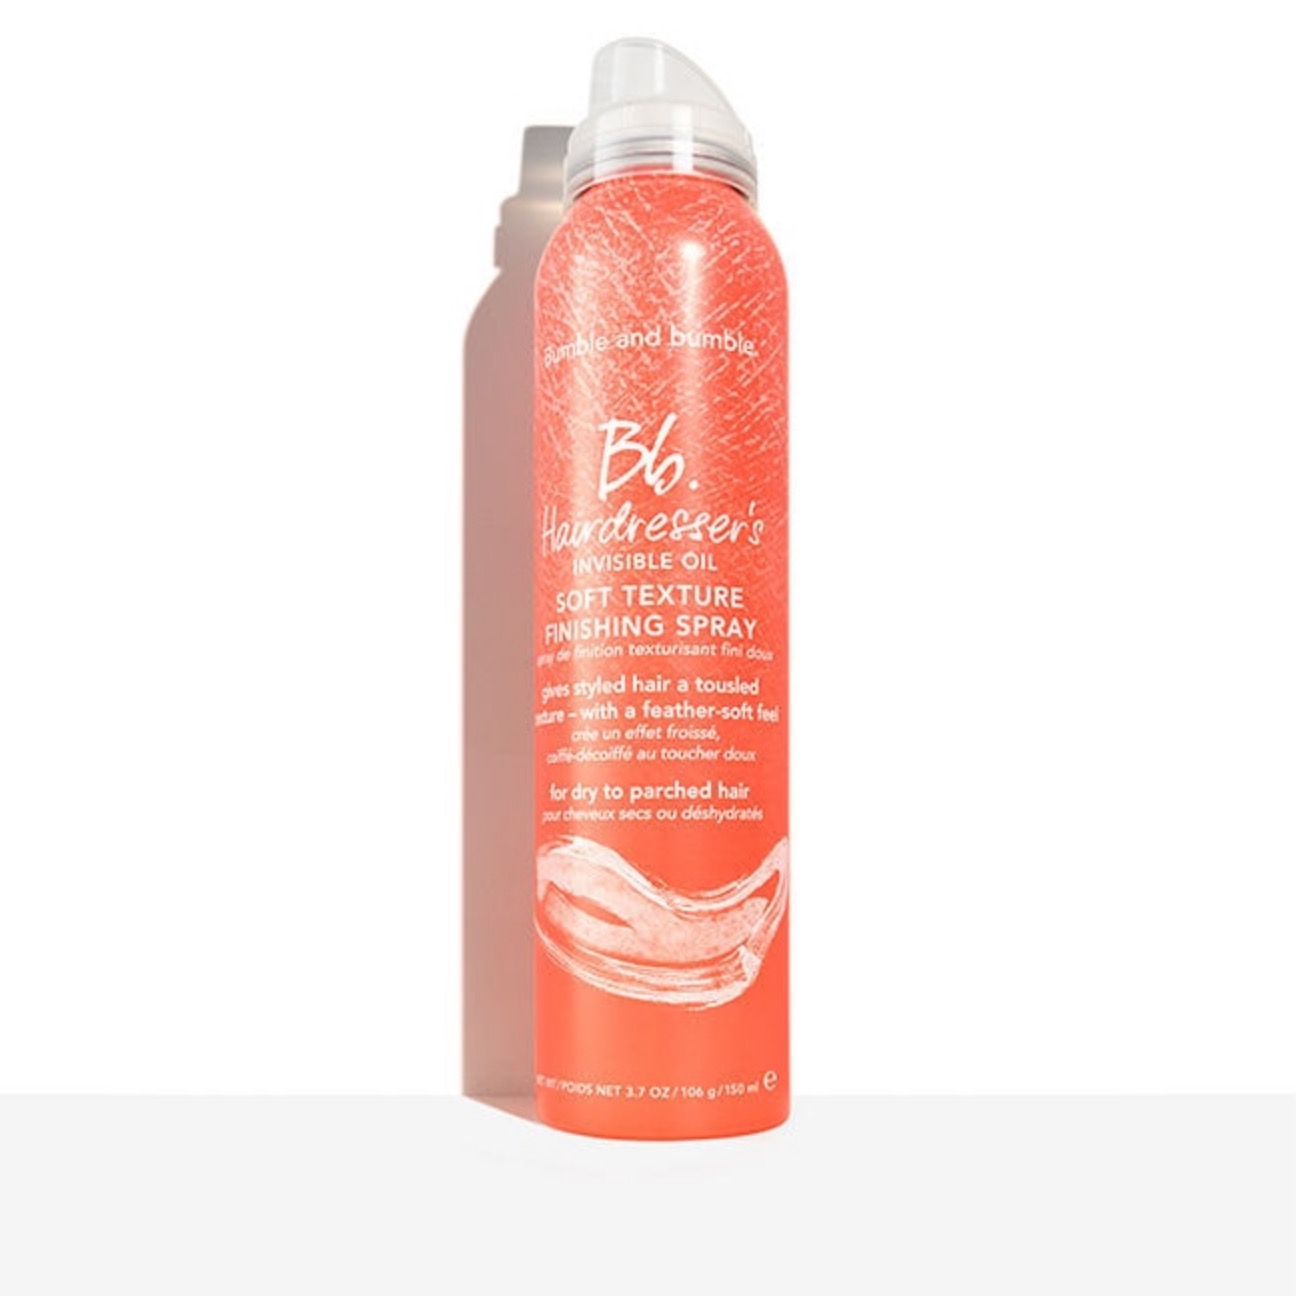 Hairdressers Invisible Oil Soft Texture Finishing Spray